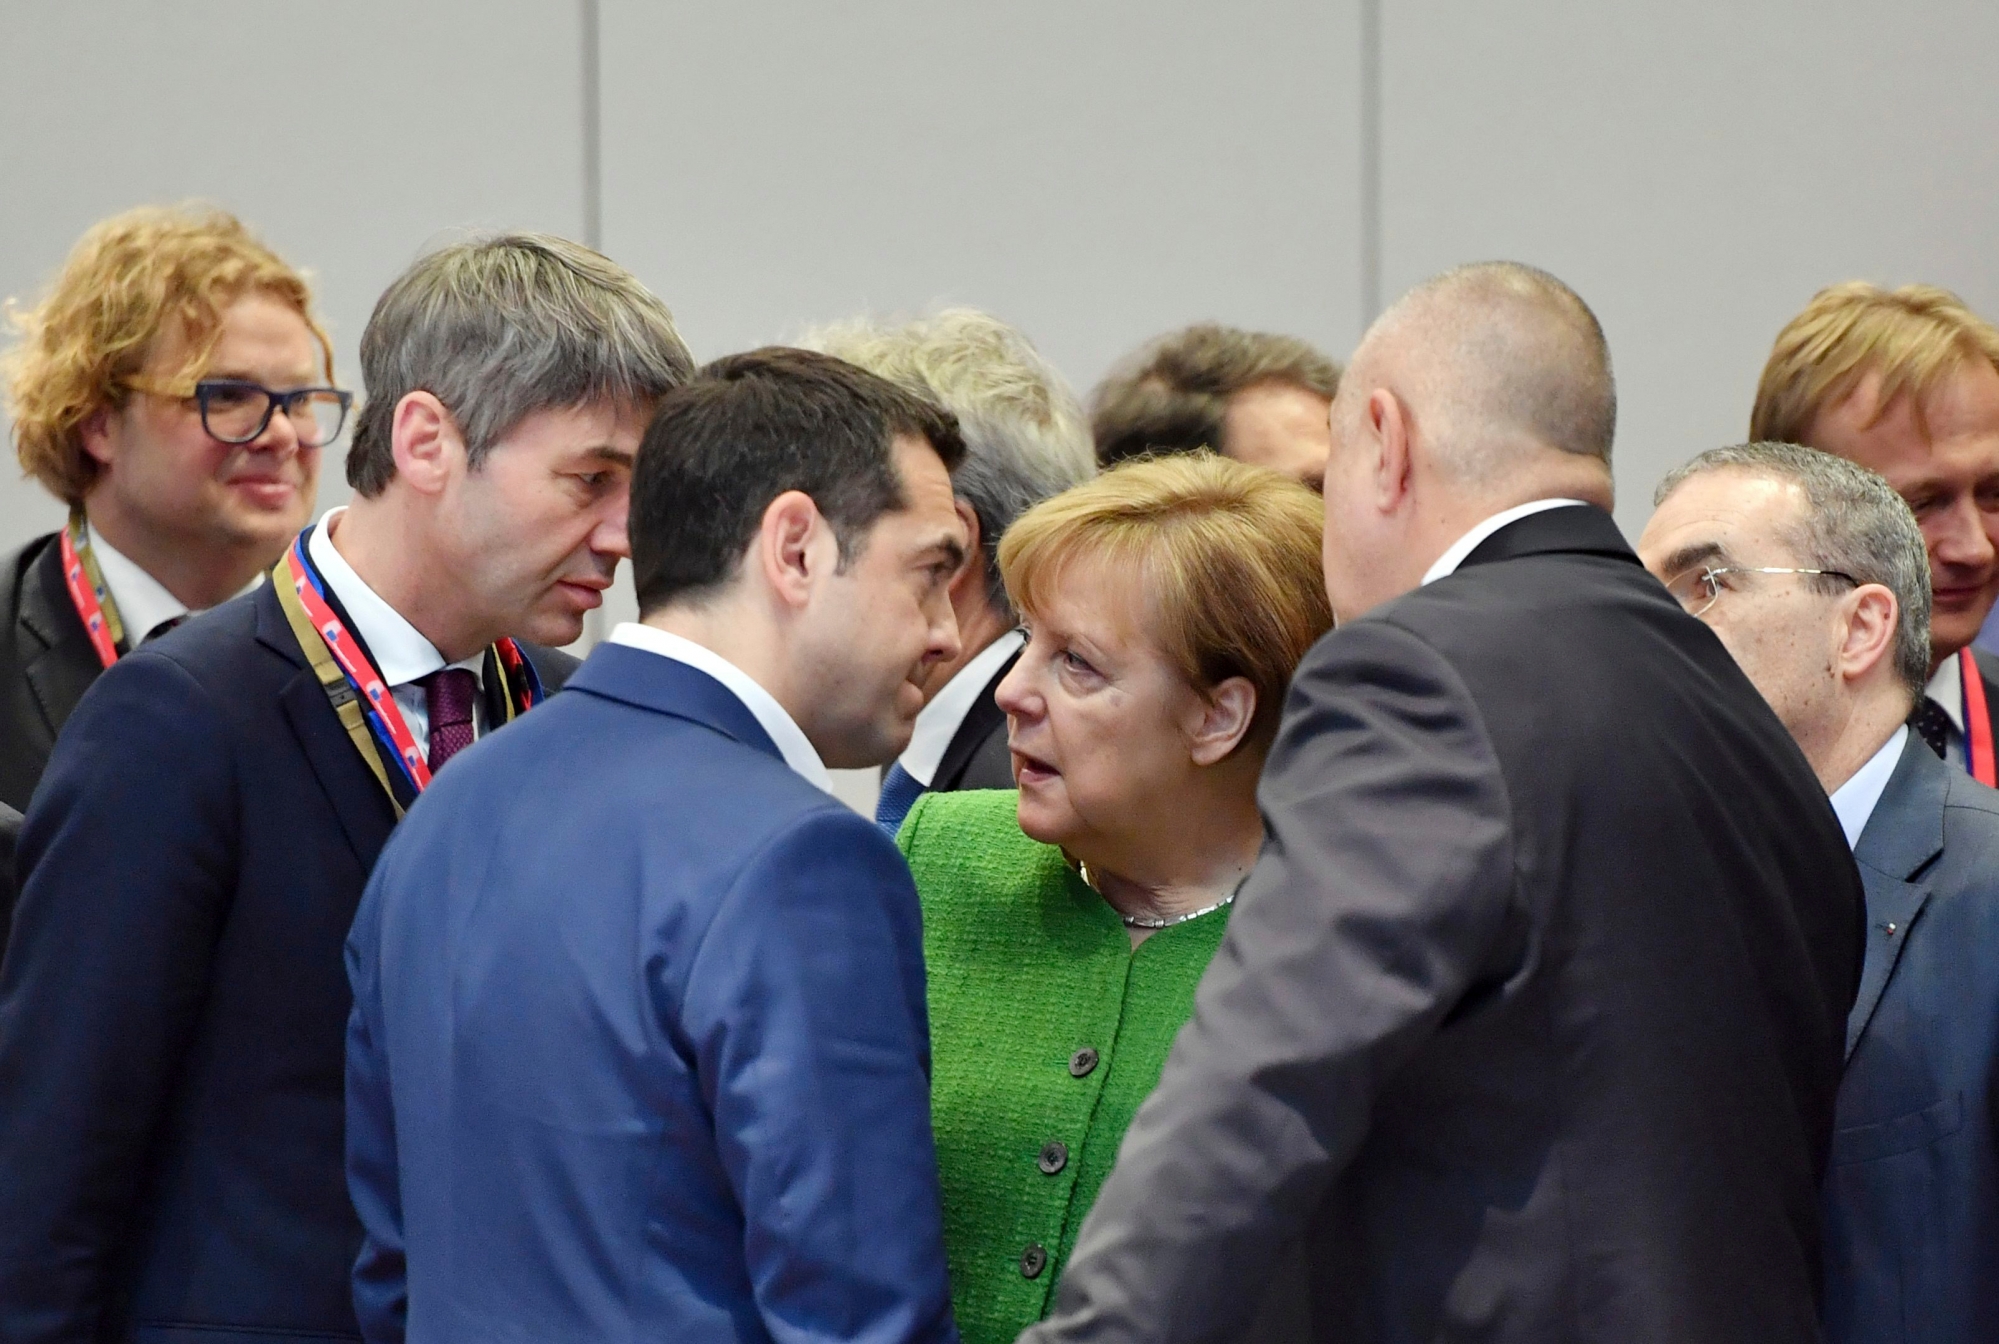 German Chancellor Angela Merkel, center, speaks with Greek Prime Minister Alexis Tsipras, center left, and Bulgarian Prime Minister Boyko Borissov, center right, during a round table at an EU summit at the Europa building in Brussels on Friday, Feb. 23, 2018. European Union leaders meet without Britain Friday looking to plug a major budget hole after Brexit and endorse a plan to streamline the European Parliament by sharing out the country's seats. (AP Photo/Geert Vanden Wijngaert) Belgium Europe Summit